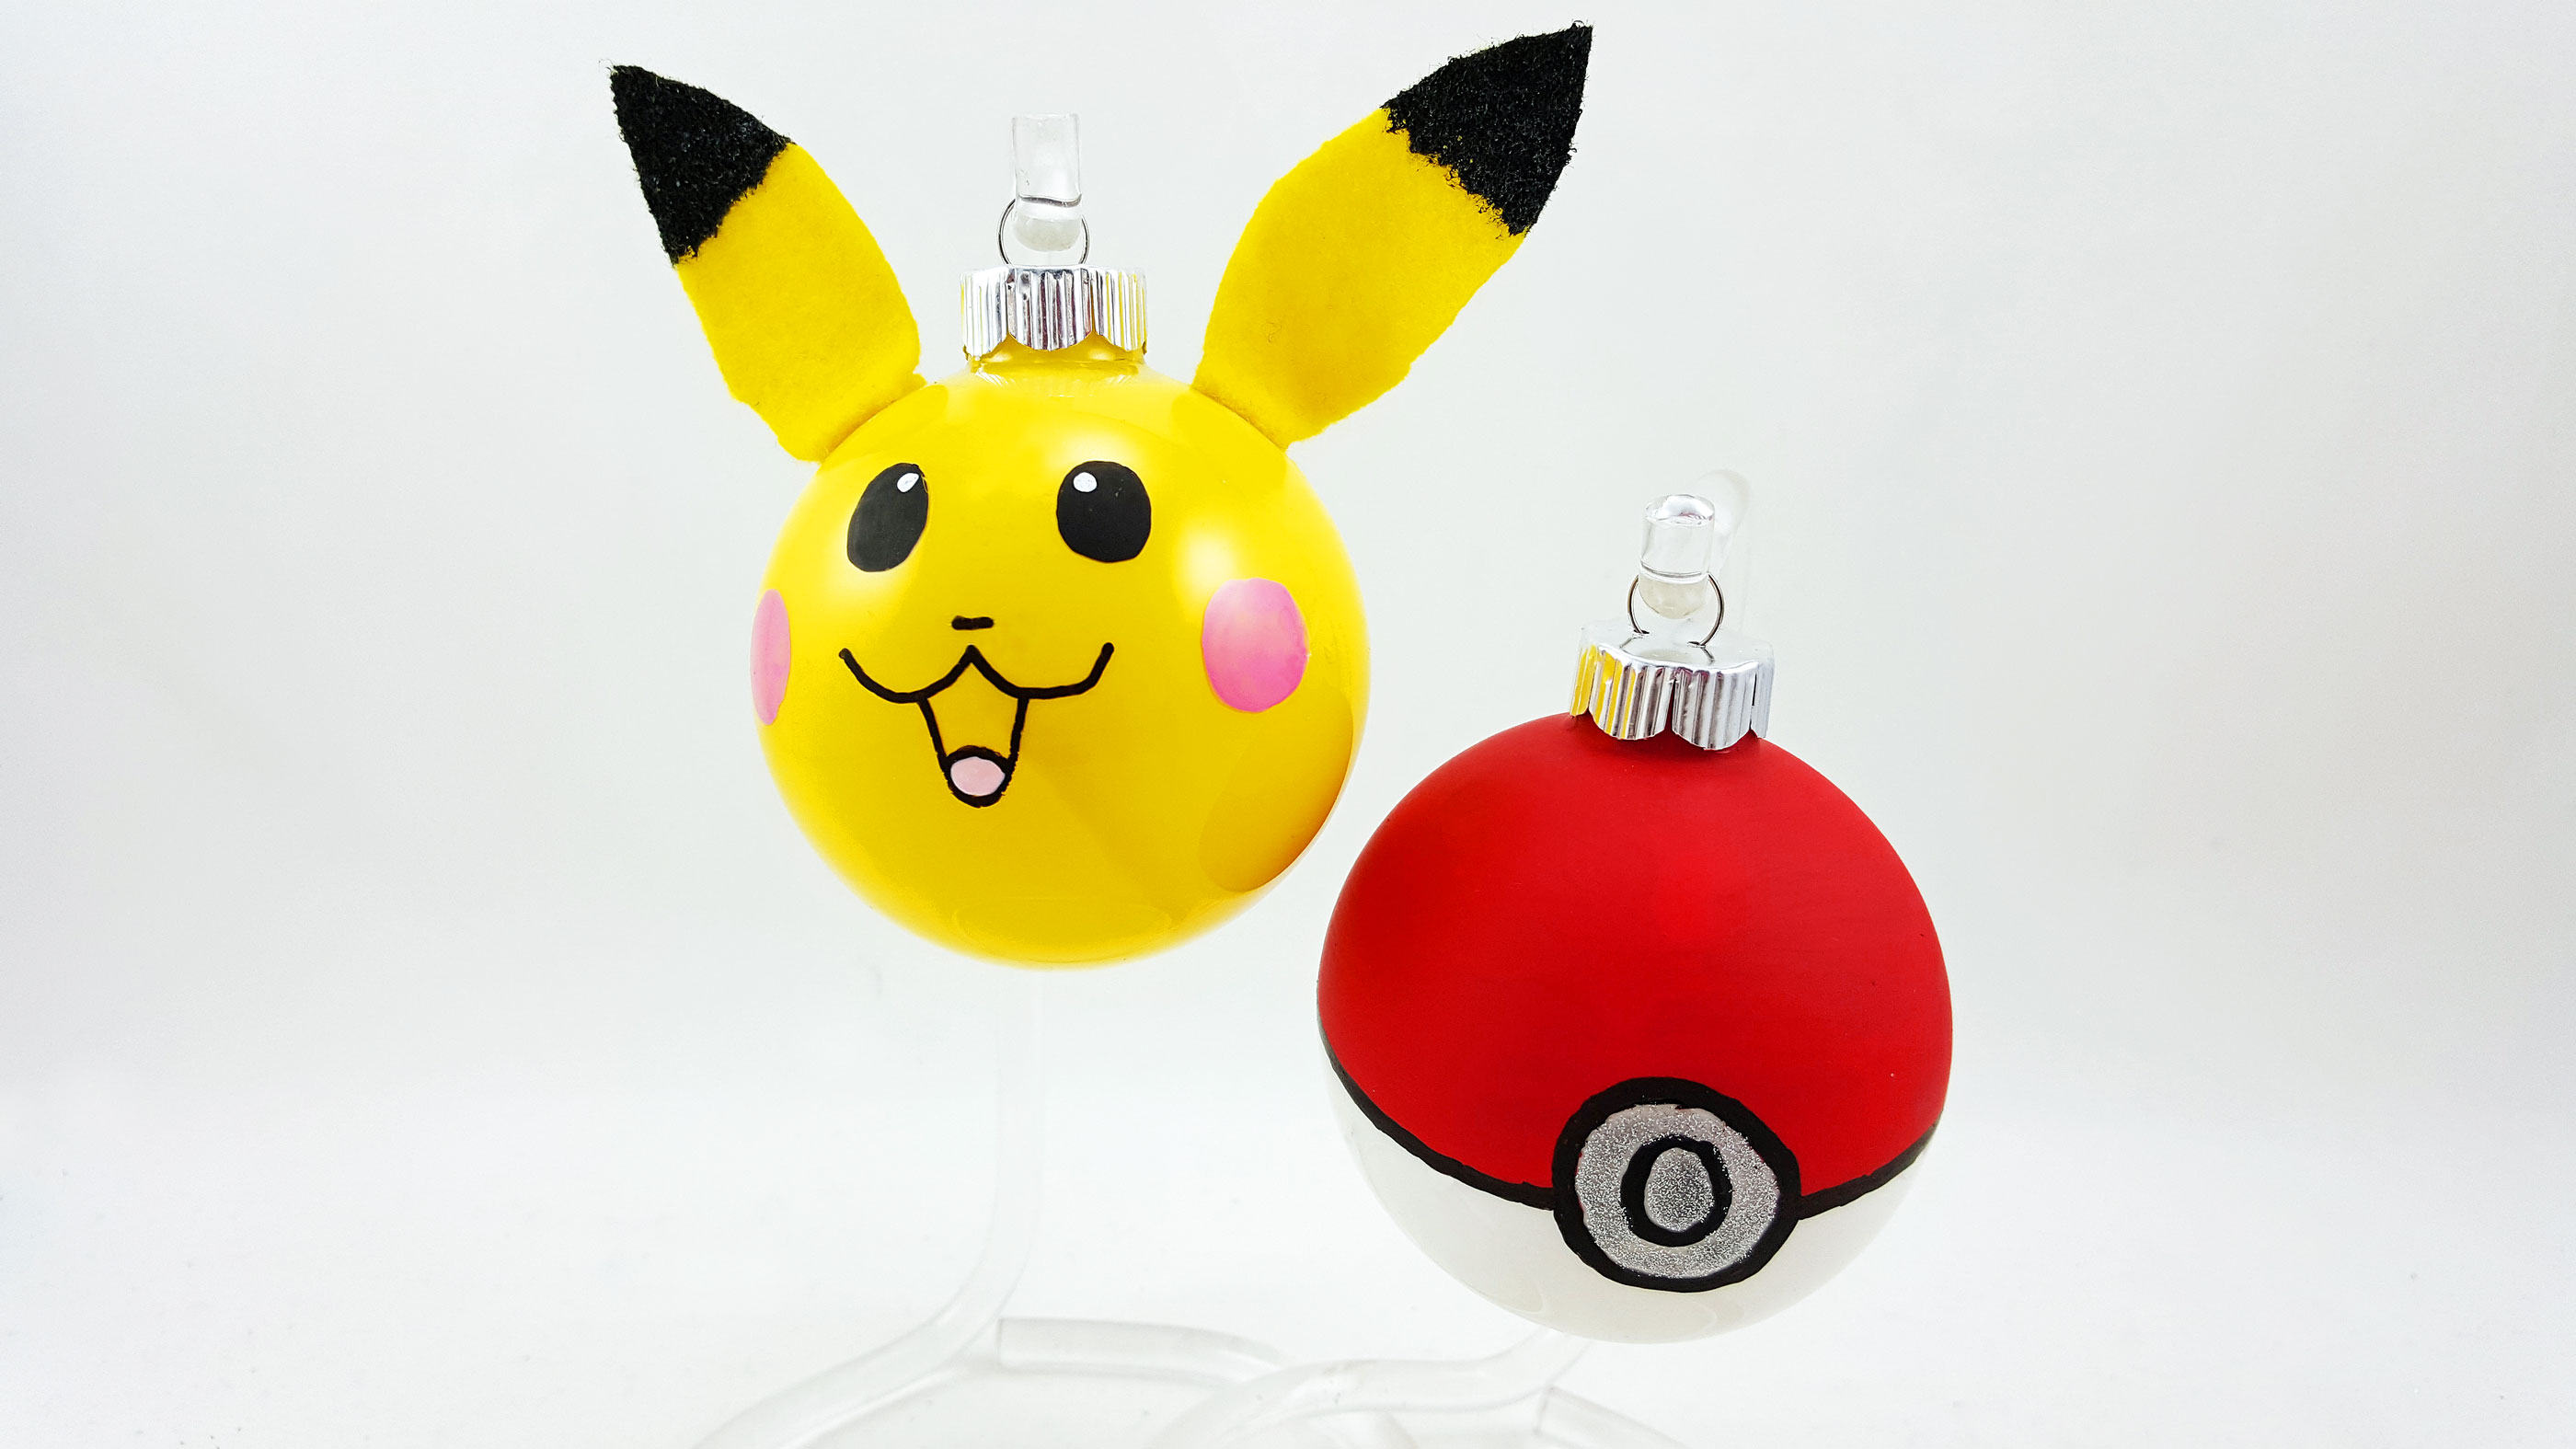 Two DIY Pokemon ornaments made from glass balls - a Pikachu and a Pokeball. | OrnamentShop.com